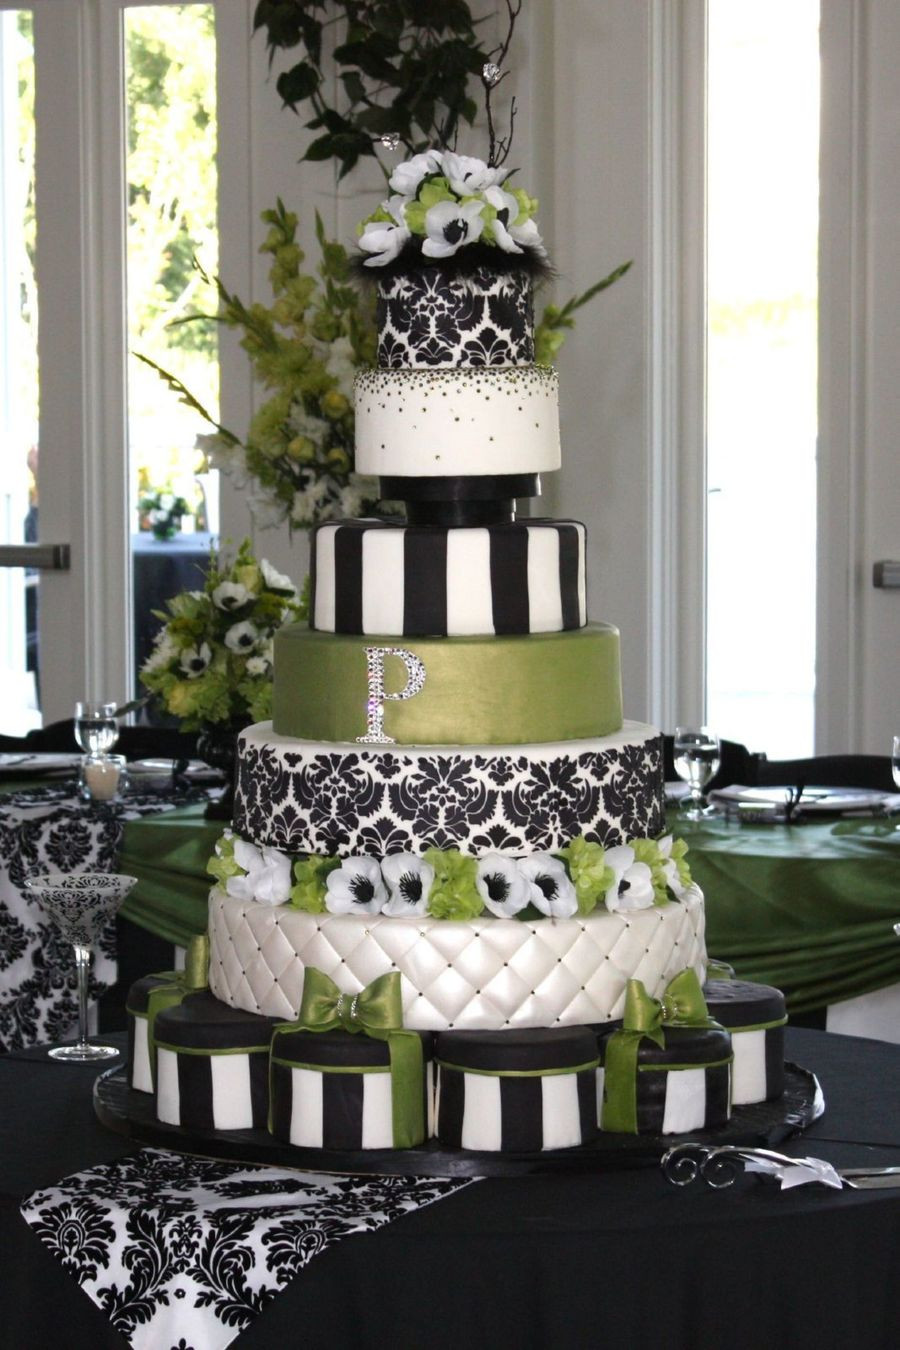 Wedding Cakes Black And White
 Green Black And White Damask Wedding Cake CakeCentral